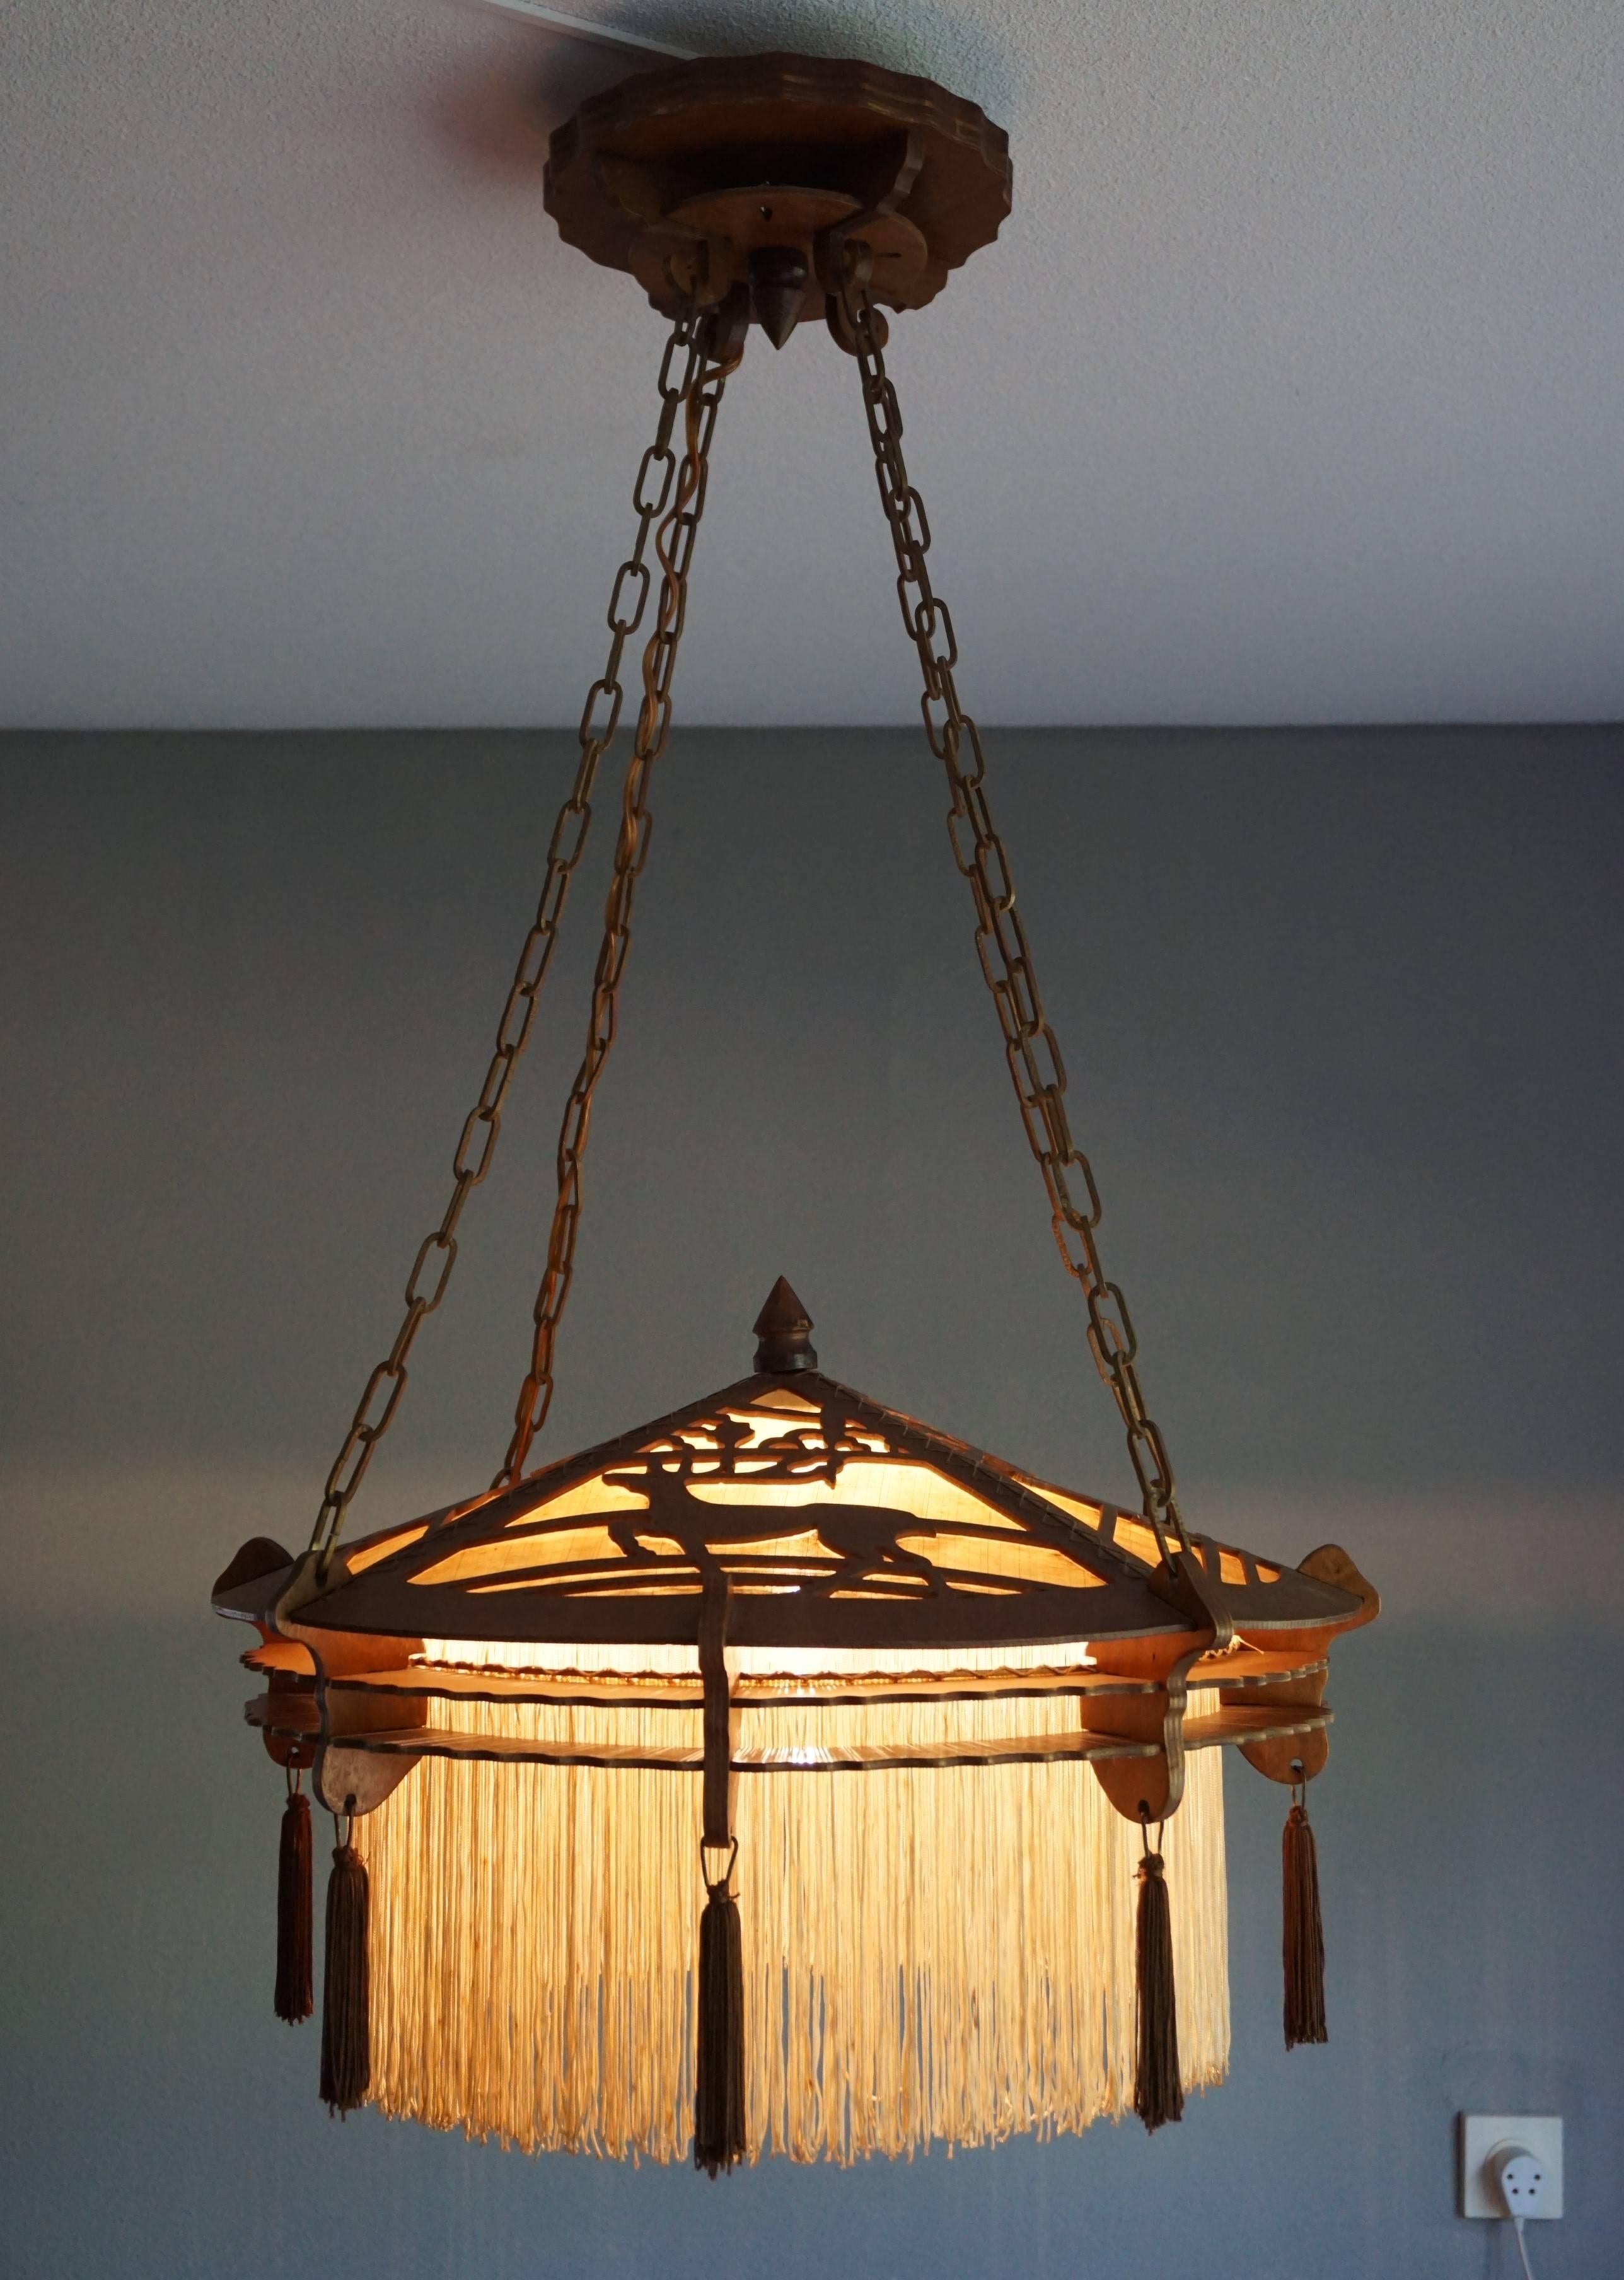 A handcrafted pendant with a very calm look and feel.

Finding rare or unique light fixtures always makes our day and when we came across this handcrafted wooden pendant we were immediately 'sold'. The calm look and feel of this handsawn and